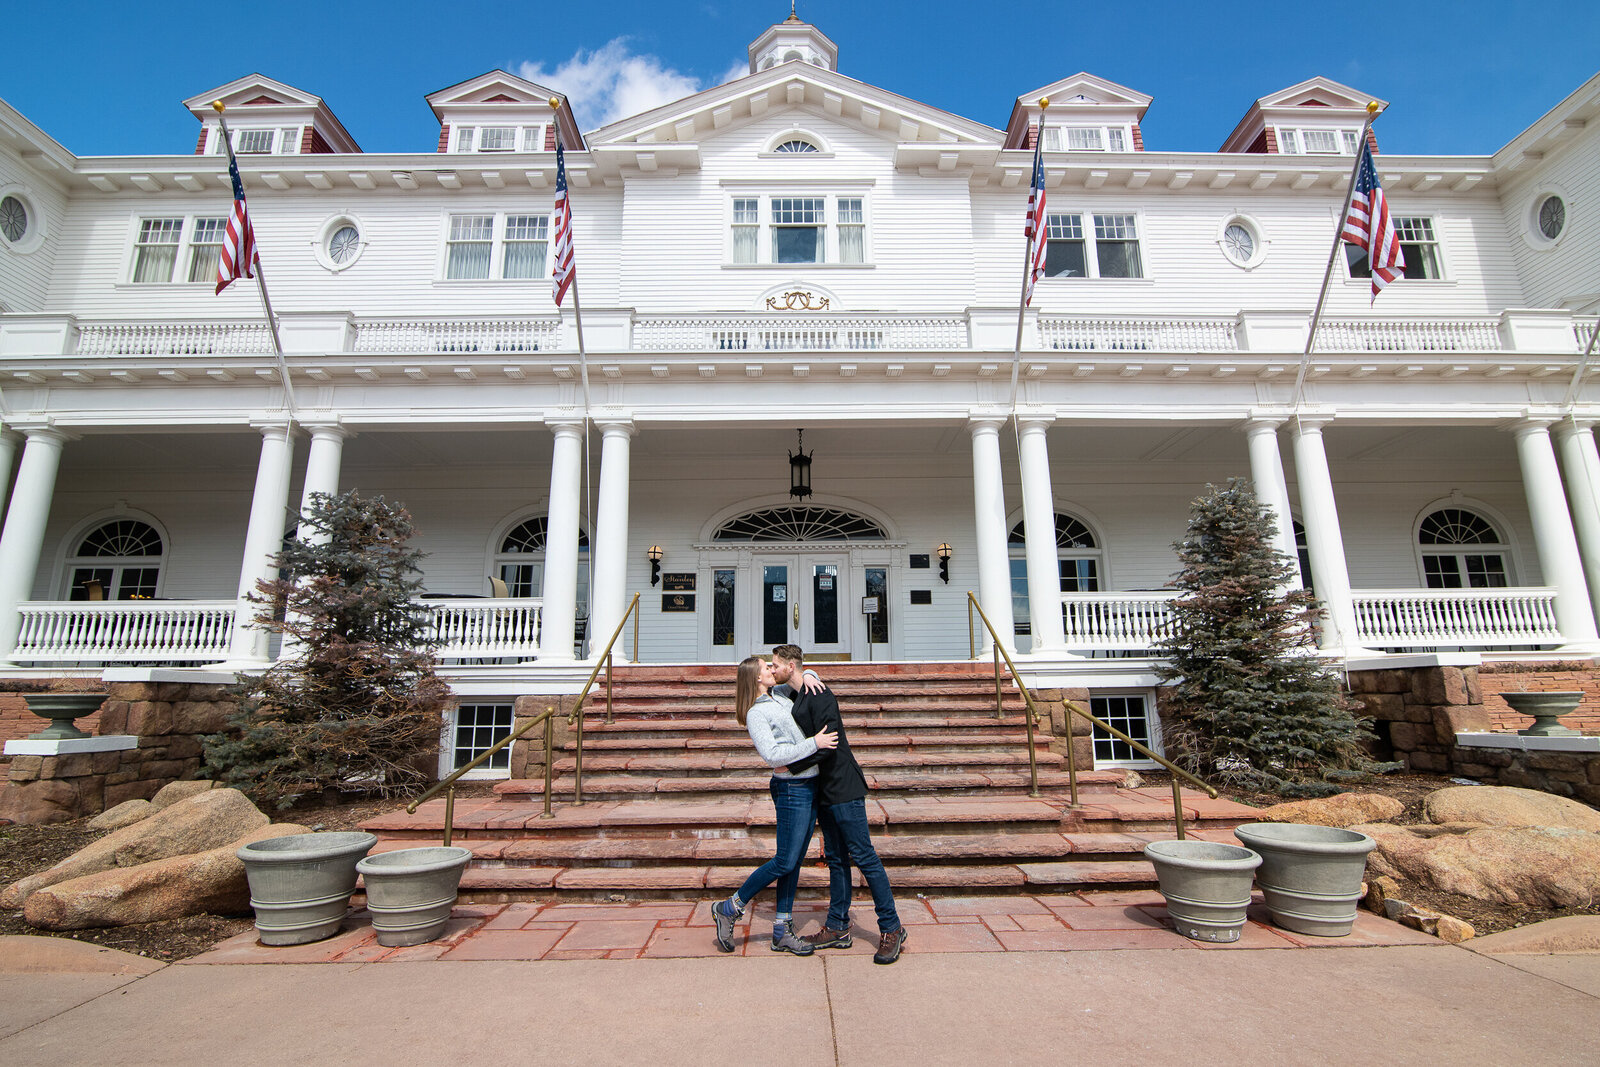 Man and woman kiss in front of the Stanley Hotel in Estes Park, Colorado.